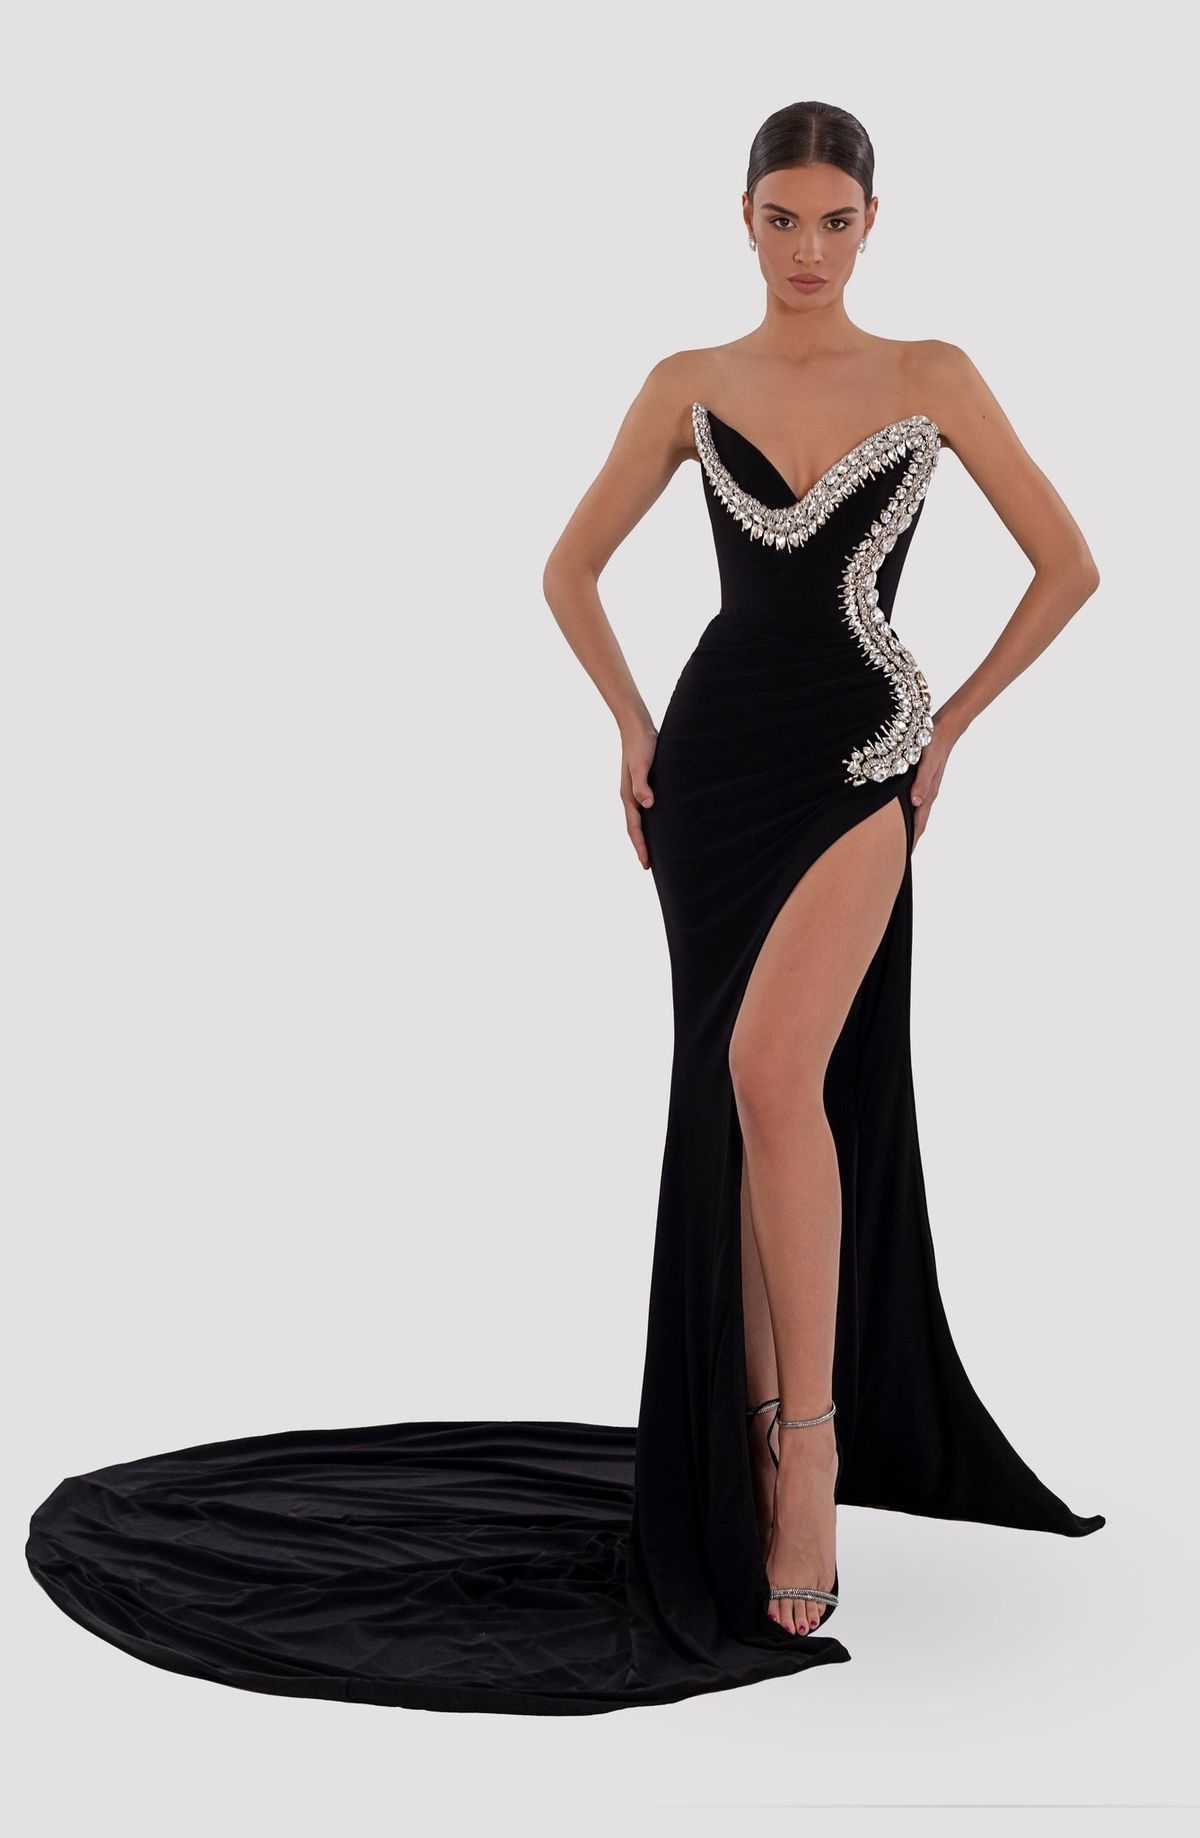 Olivia Pope Inspired Black And White Black Tie Evening Gown By Kerry  Washington Perfect For Scandal, Red Carpet Events, And Formal Events L150e  From Alpsopk, $107.8 | DHgate.Com